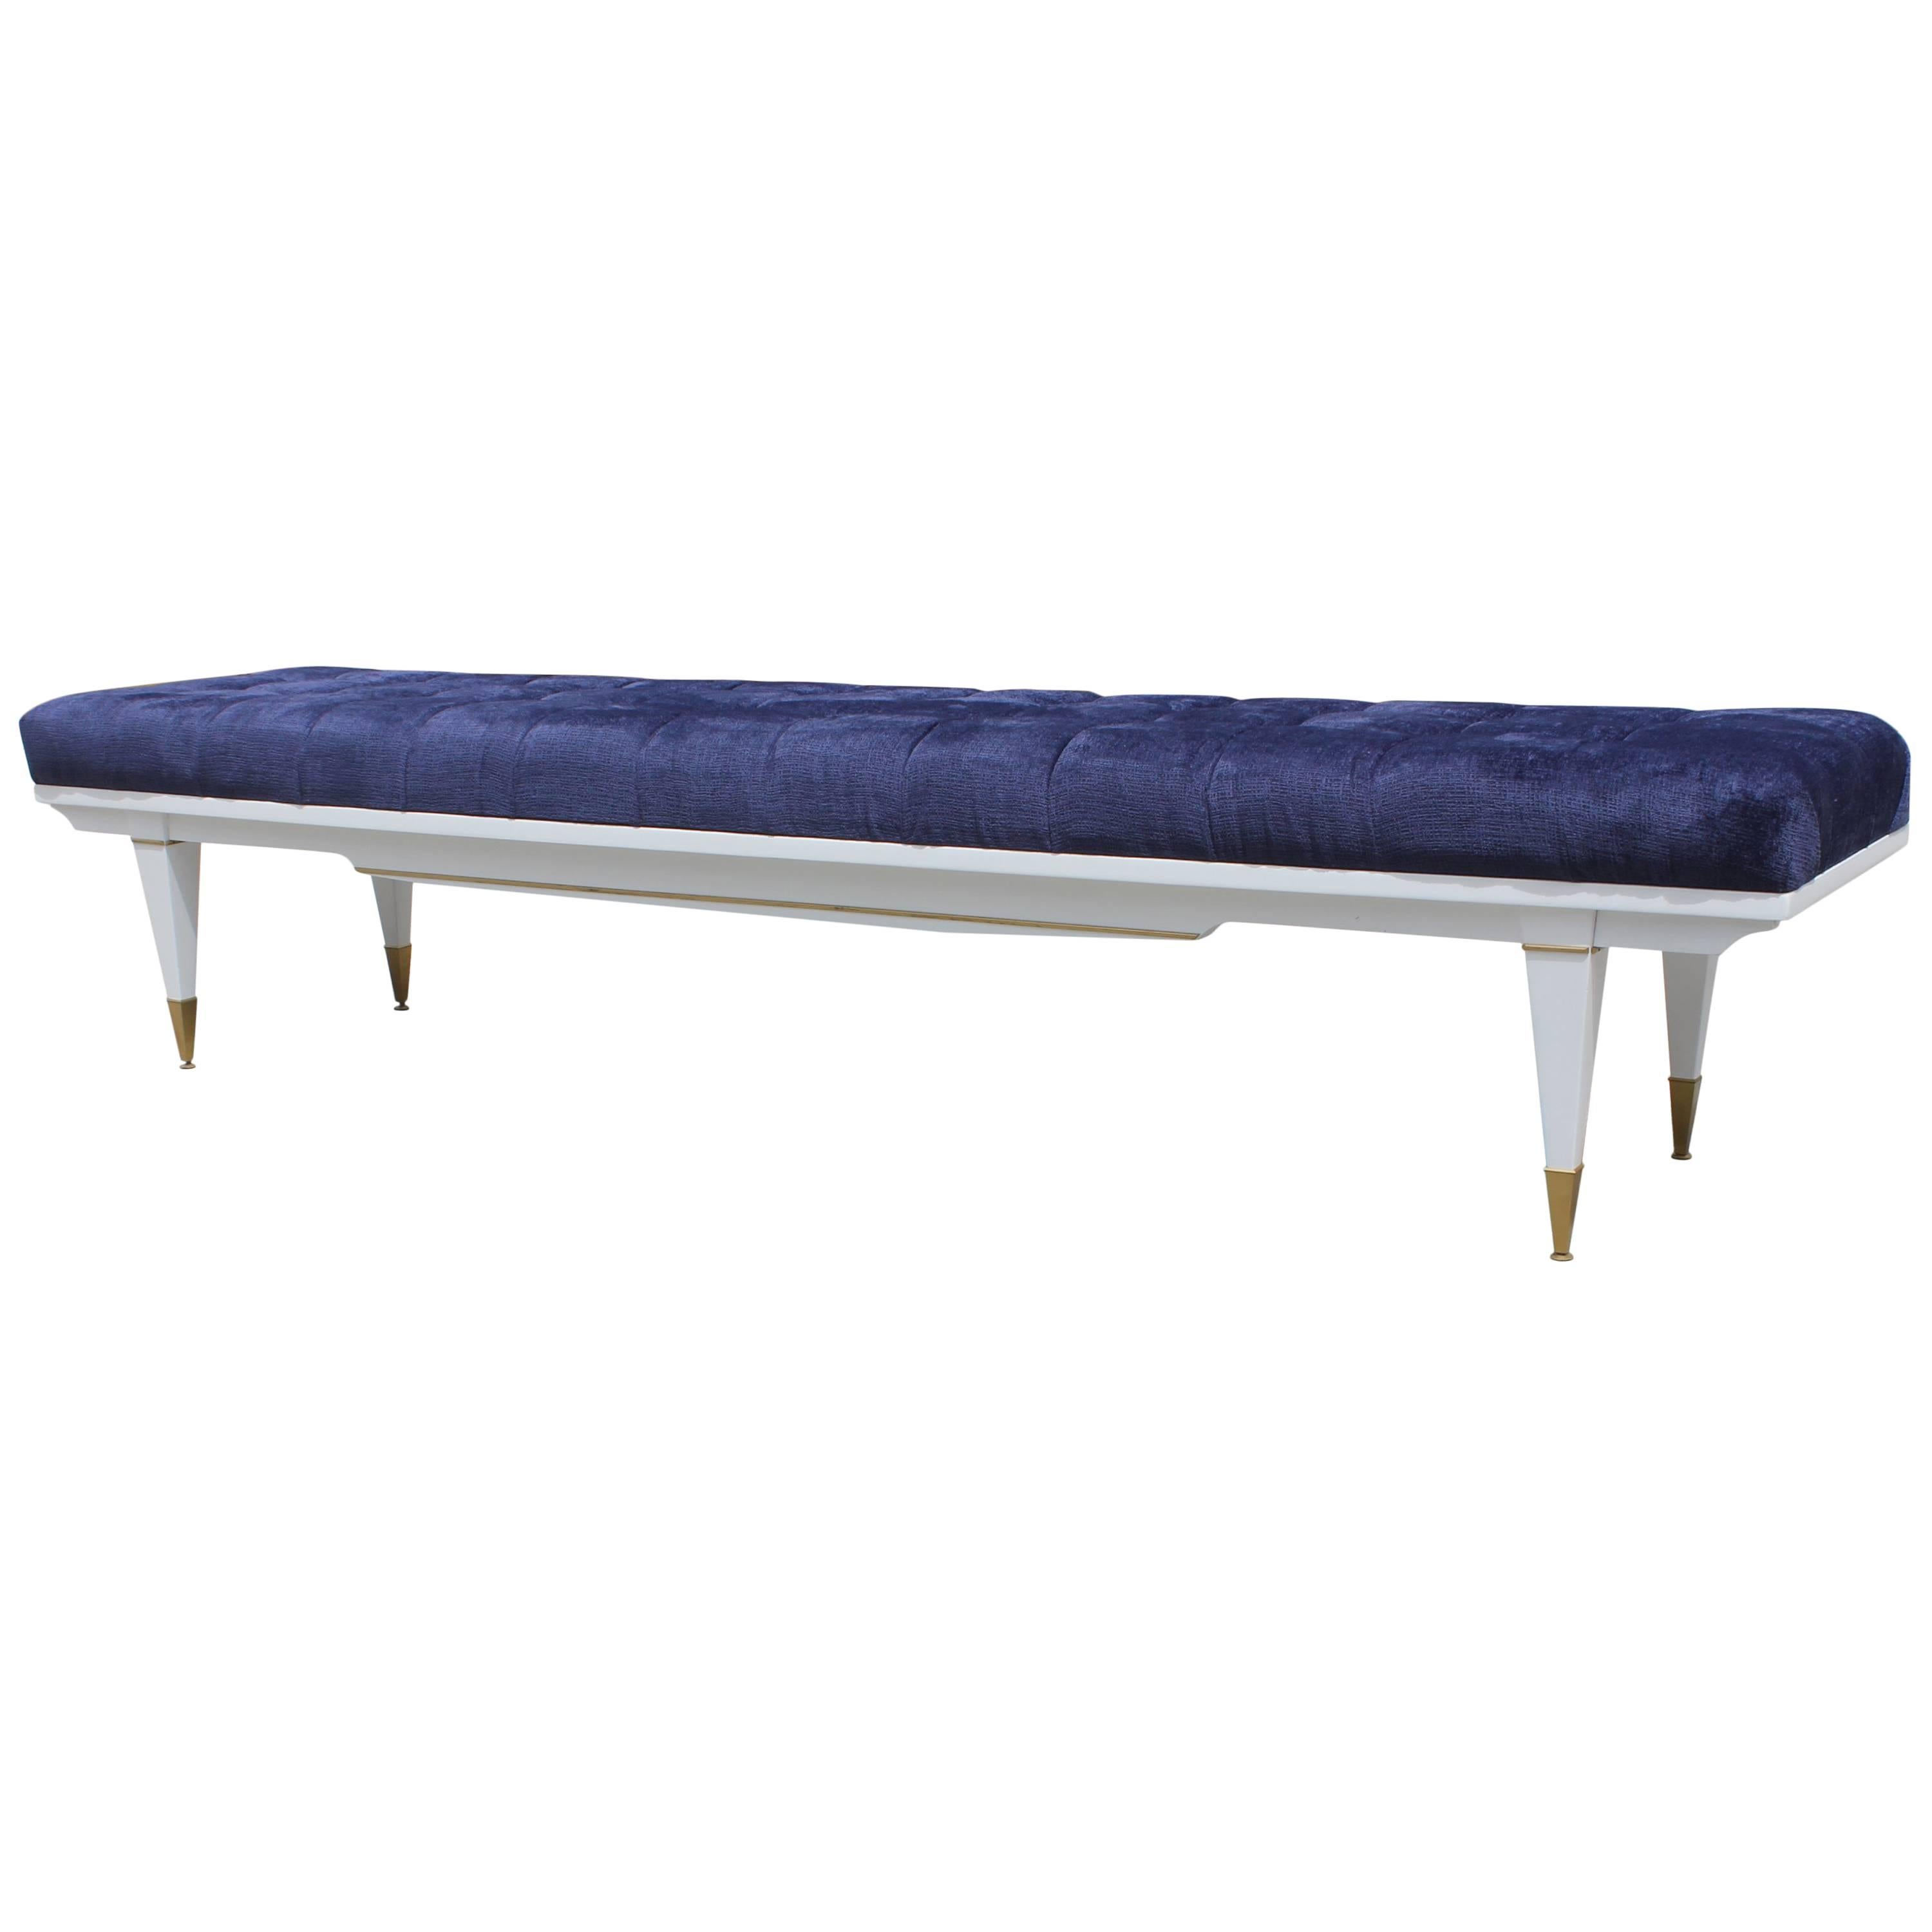 French Art Deco Snow White Lacquered Long Sitting Bench, circa 1940s